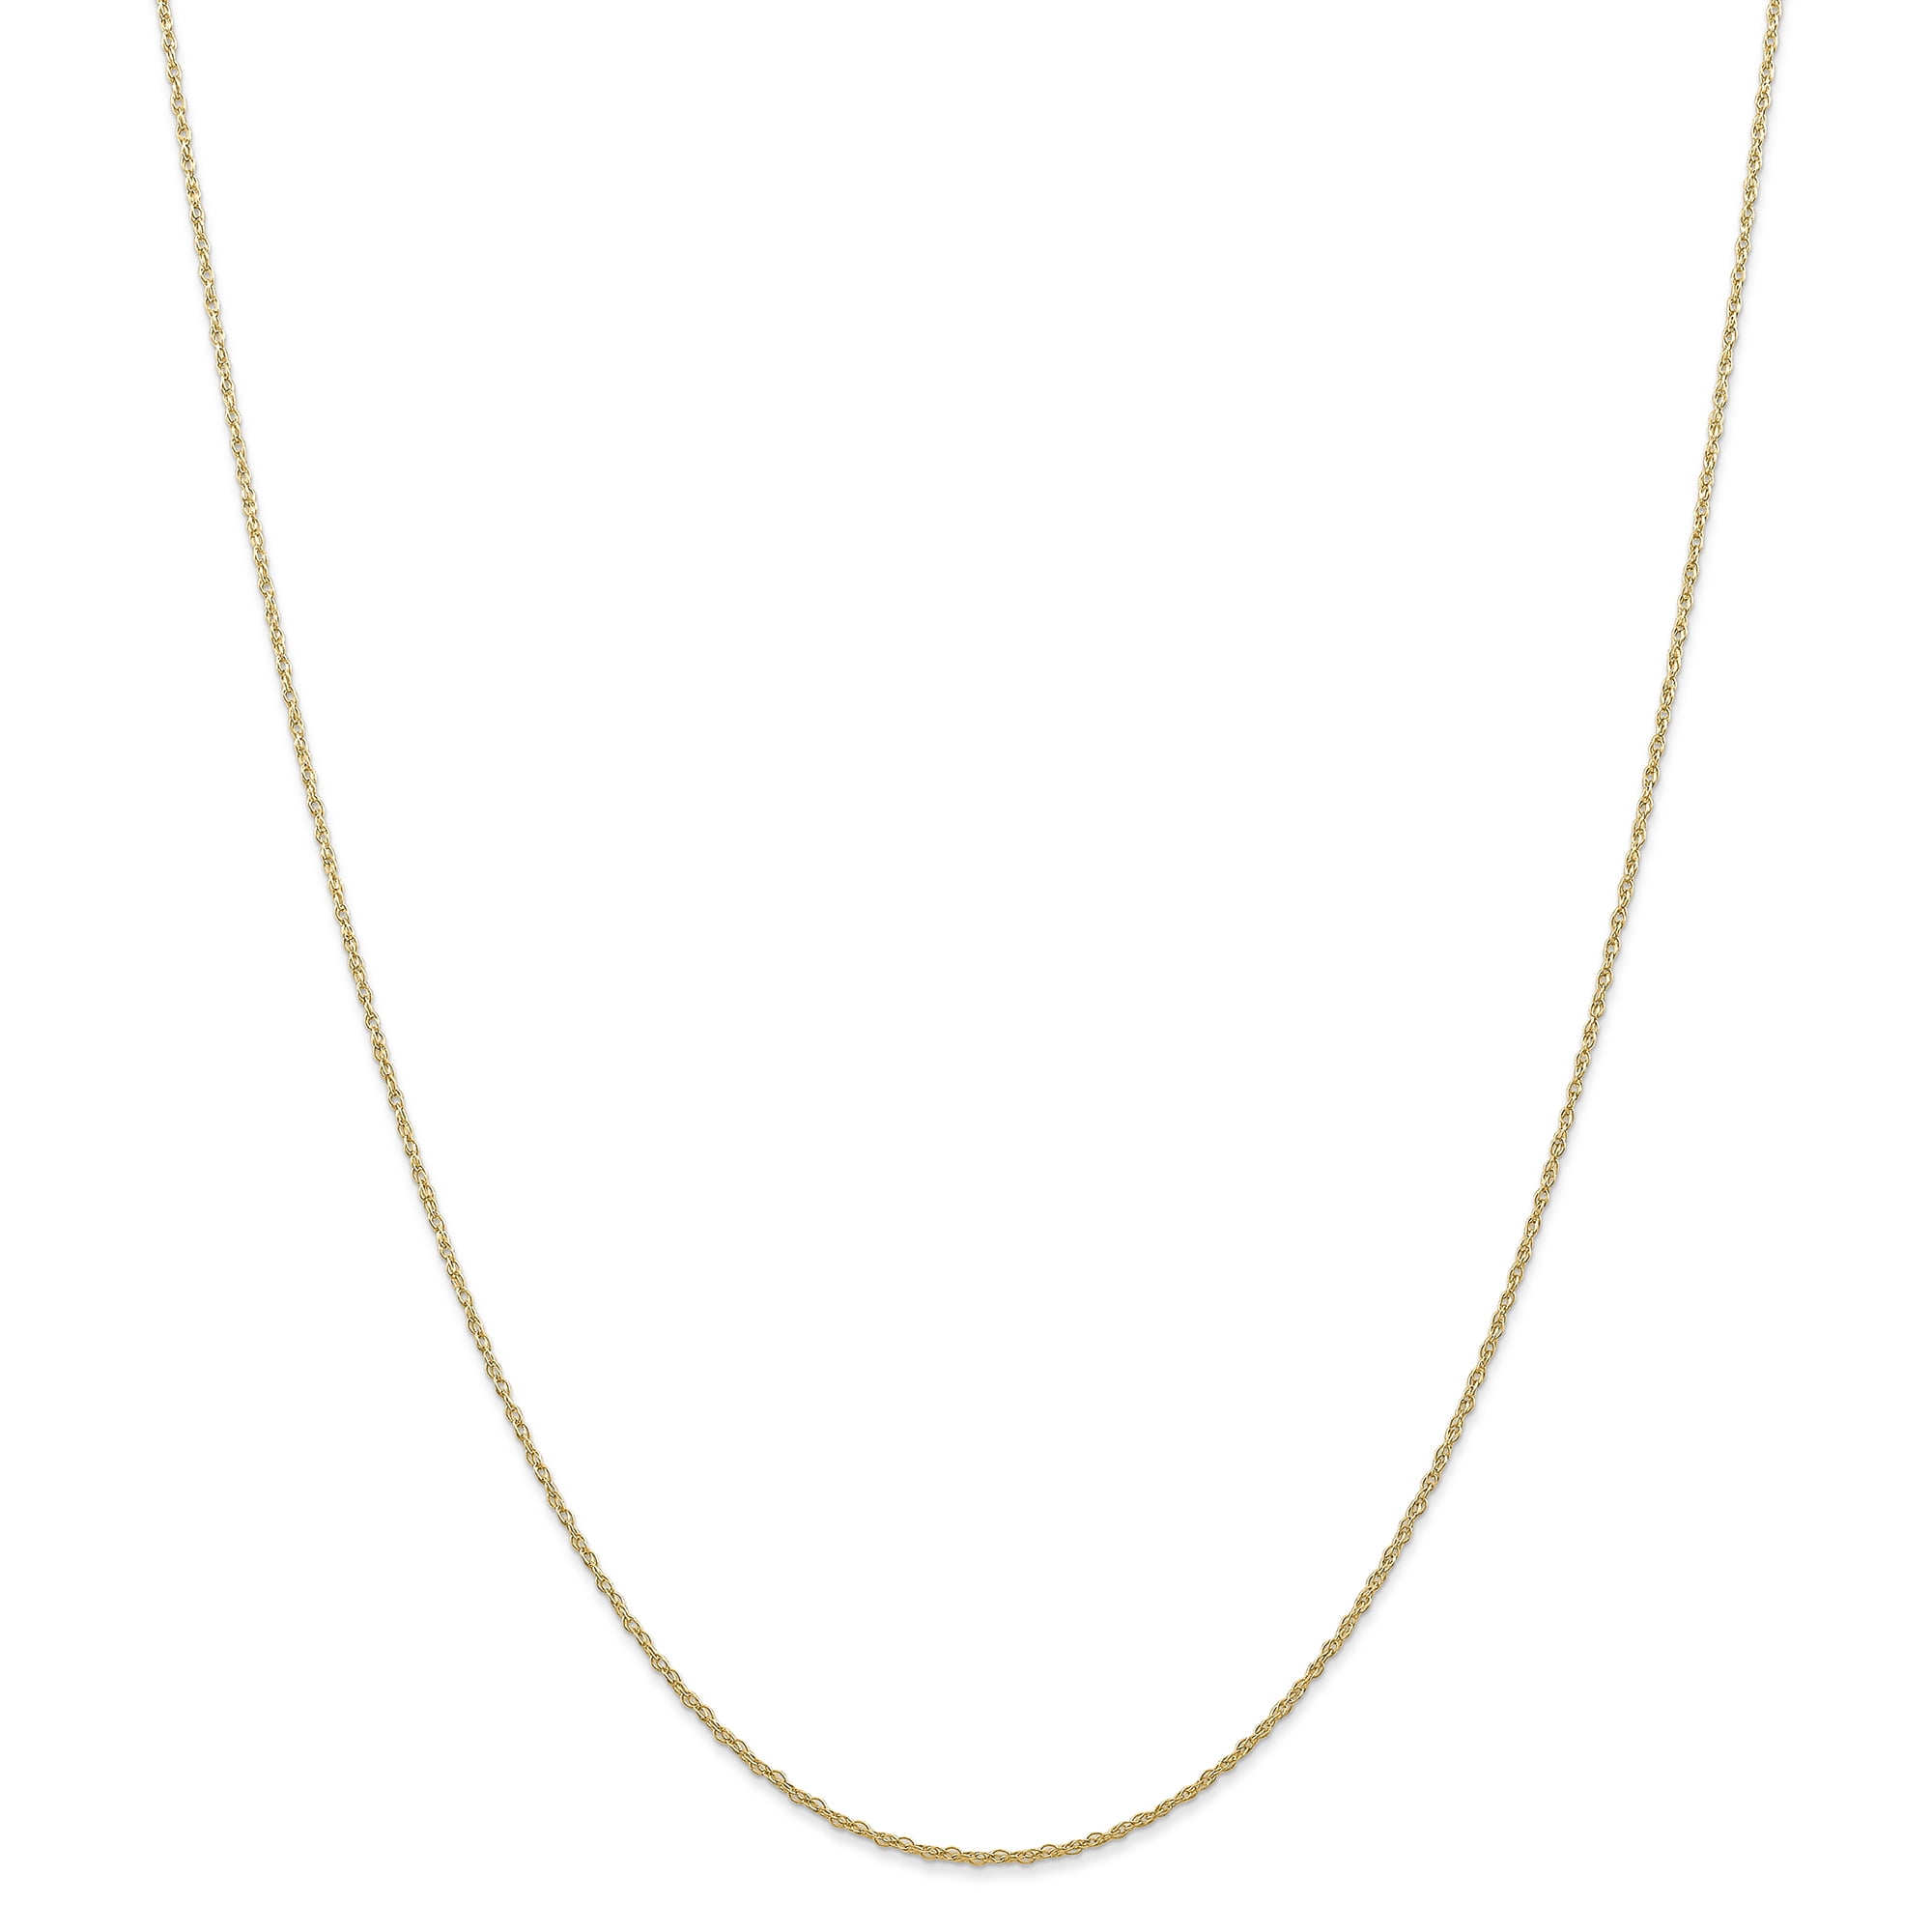 Solid 14k Yellow Gold .7mm Carded Cable Rope Chain Necklace 16-